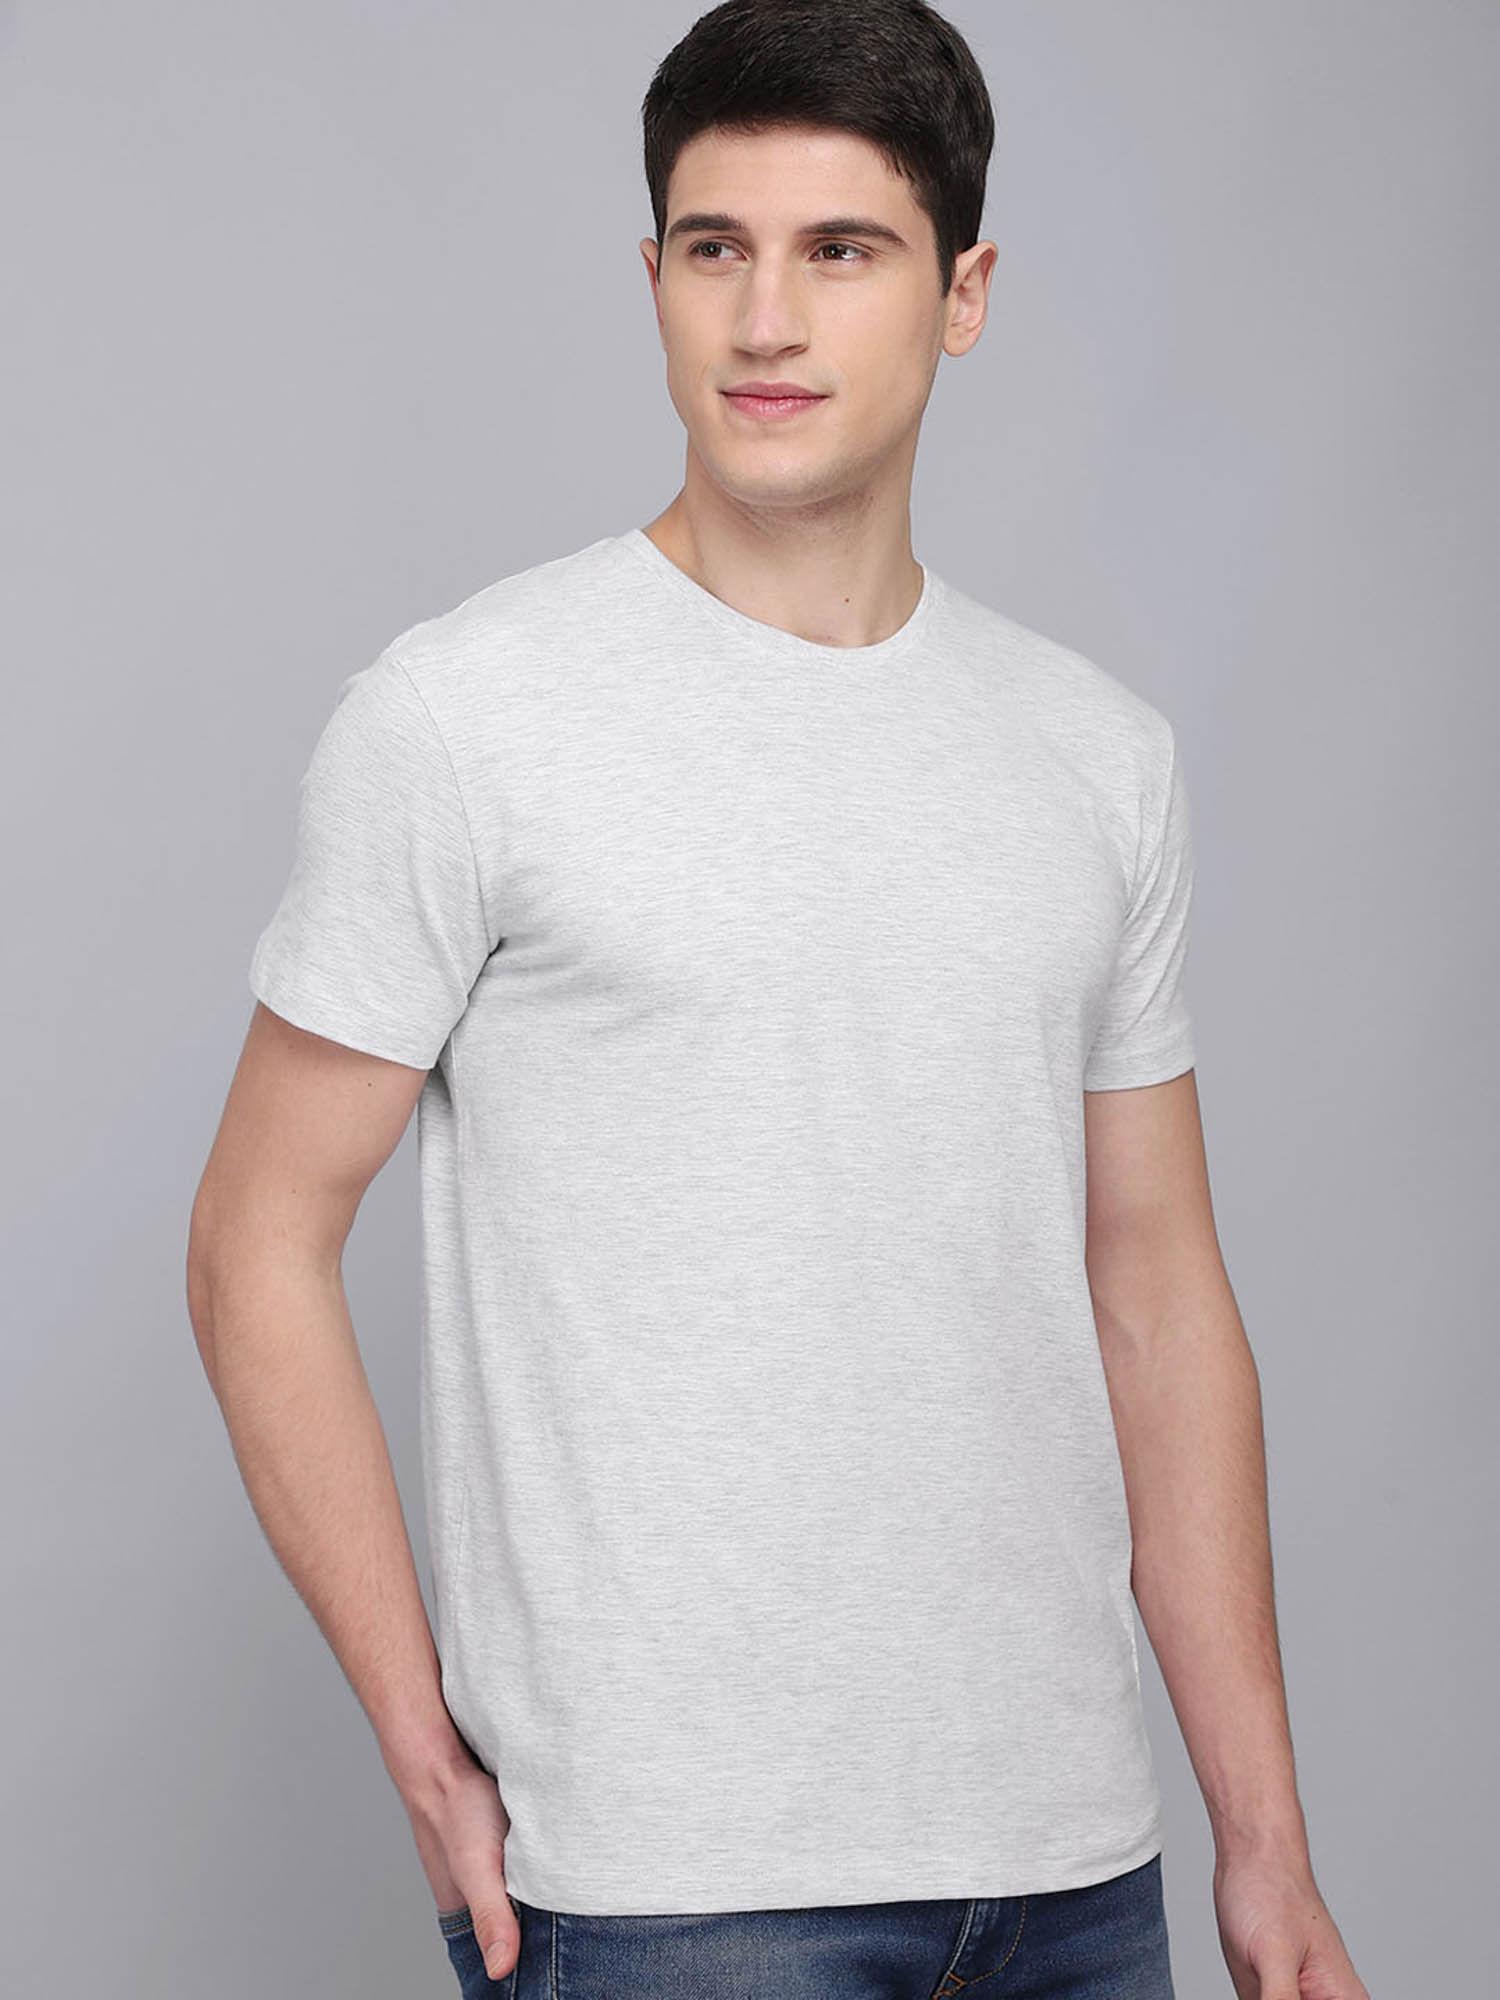 featured grey tshirt for young men